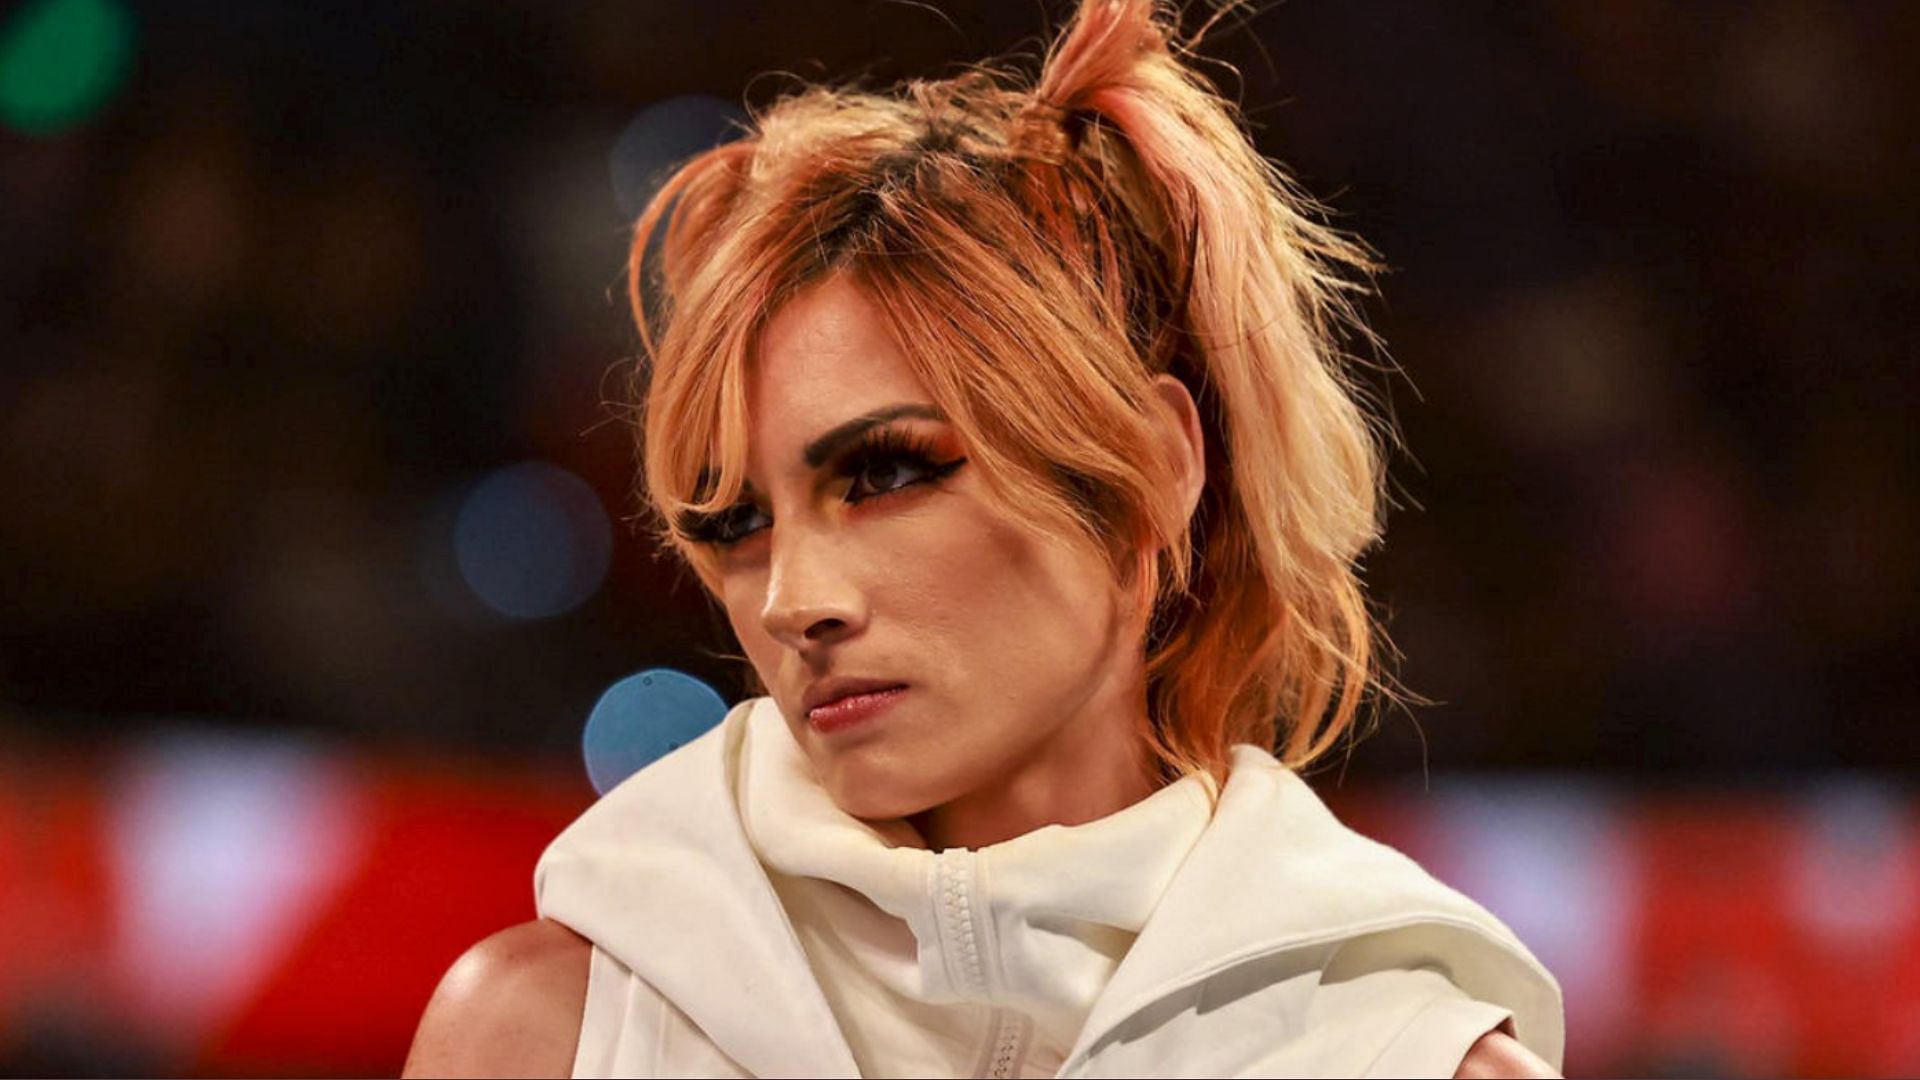 Becky Lynch during a promo on the 7/18 edition of WWE RAW